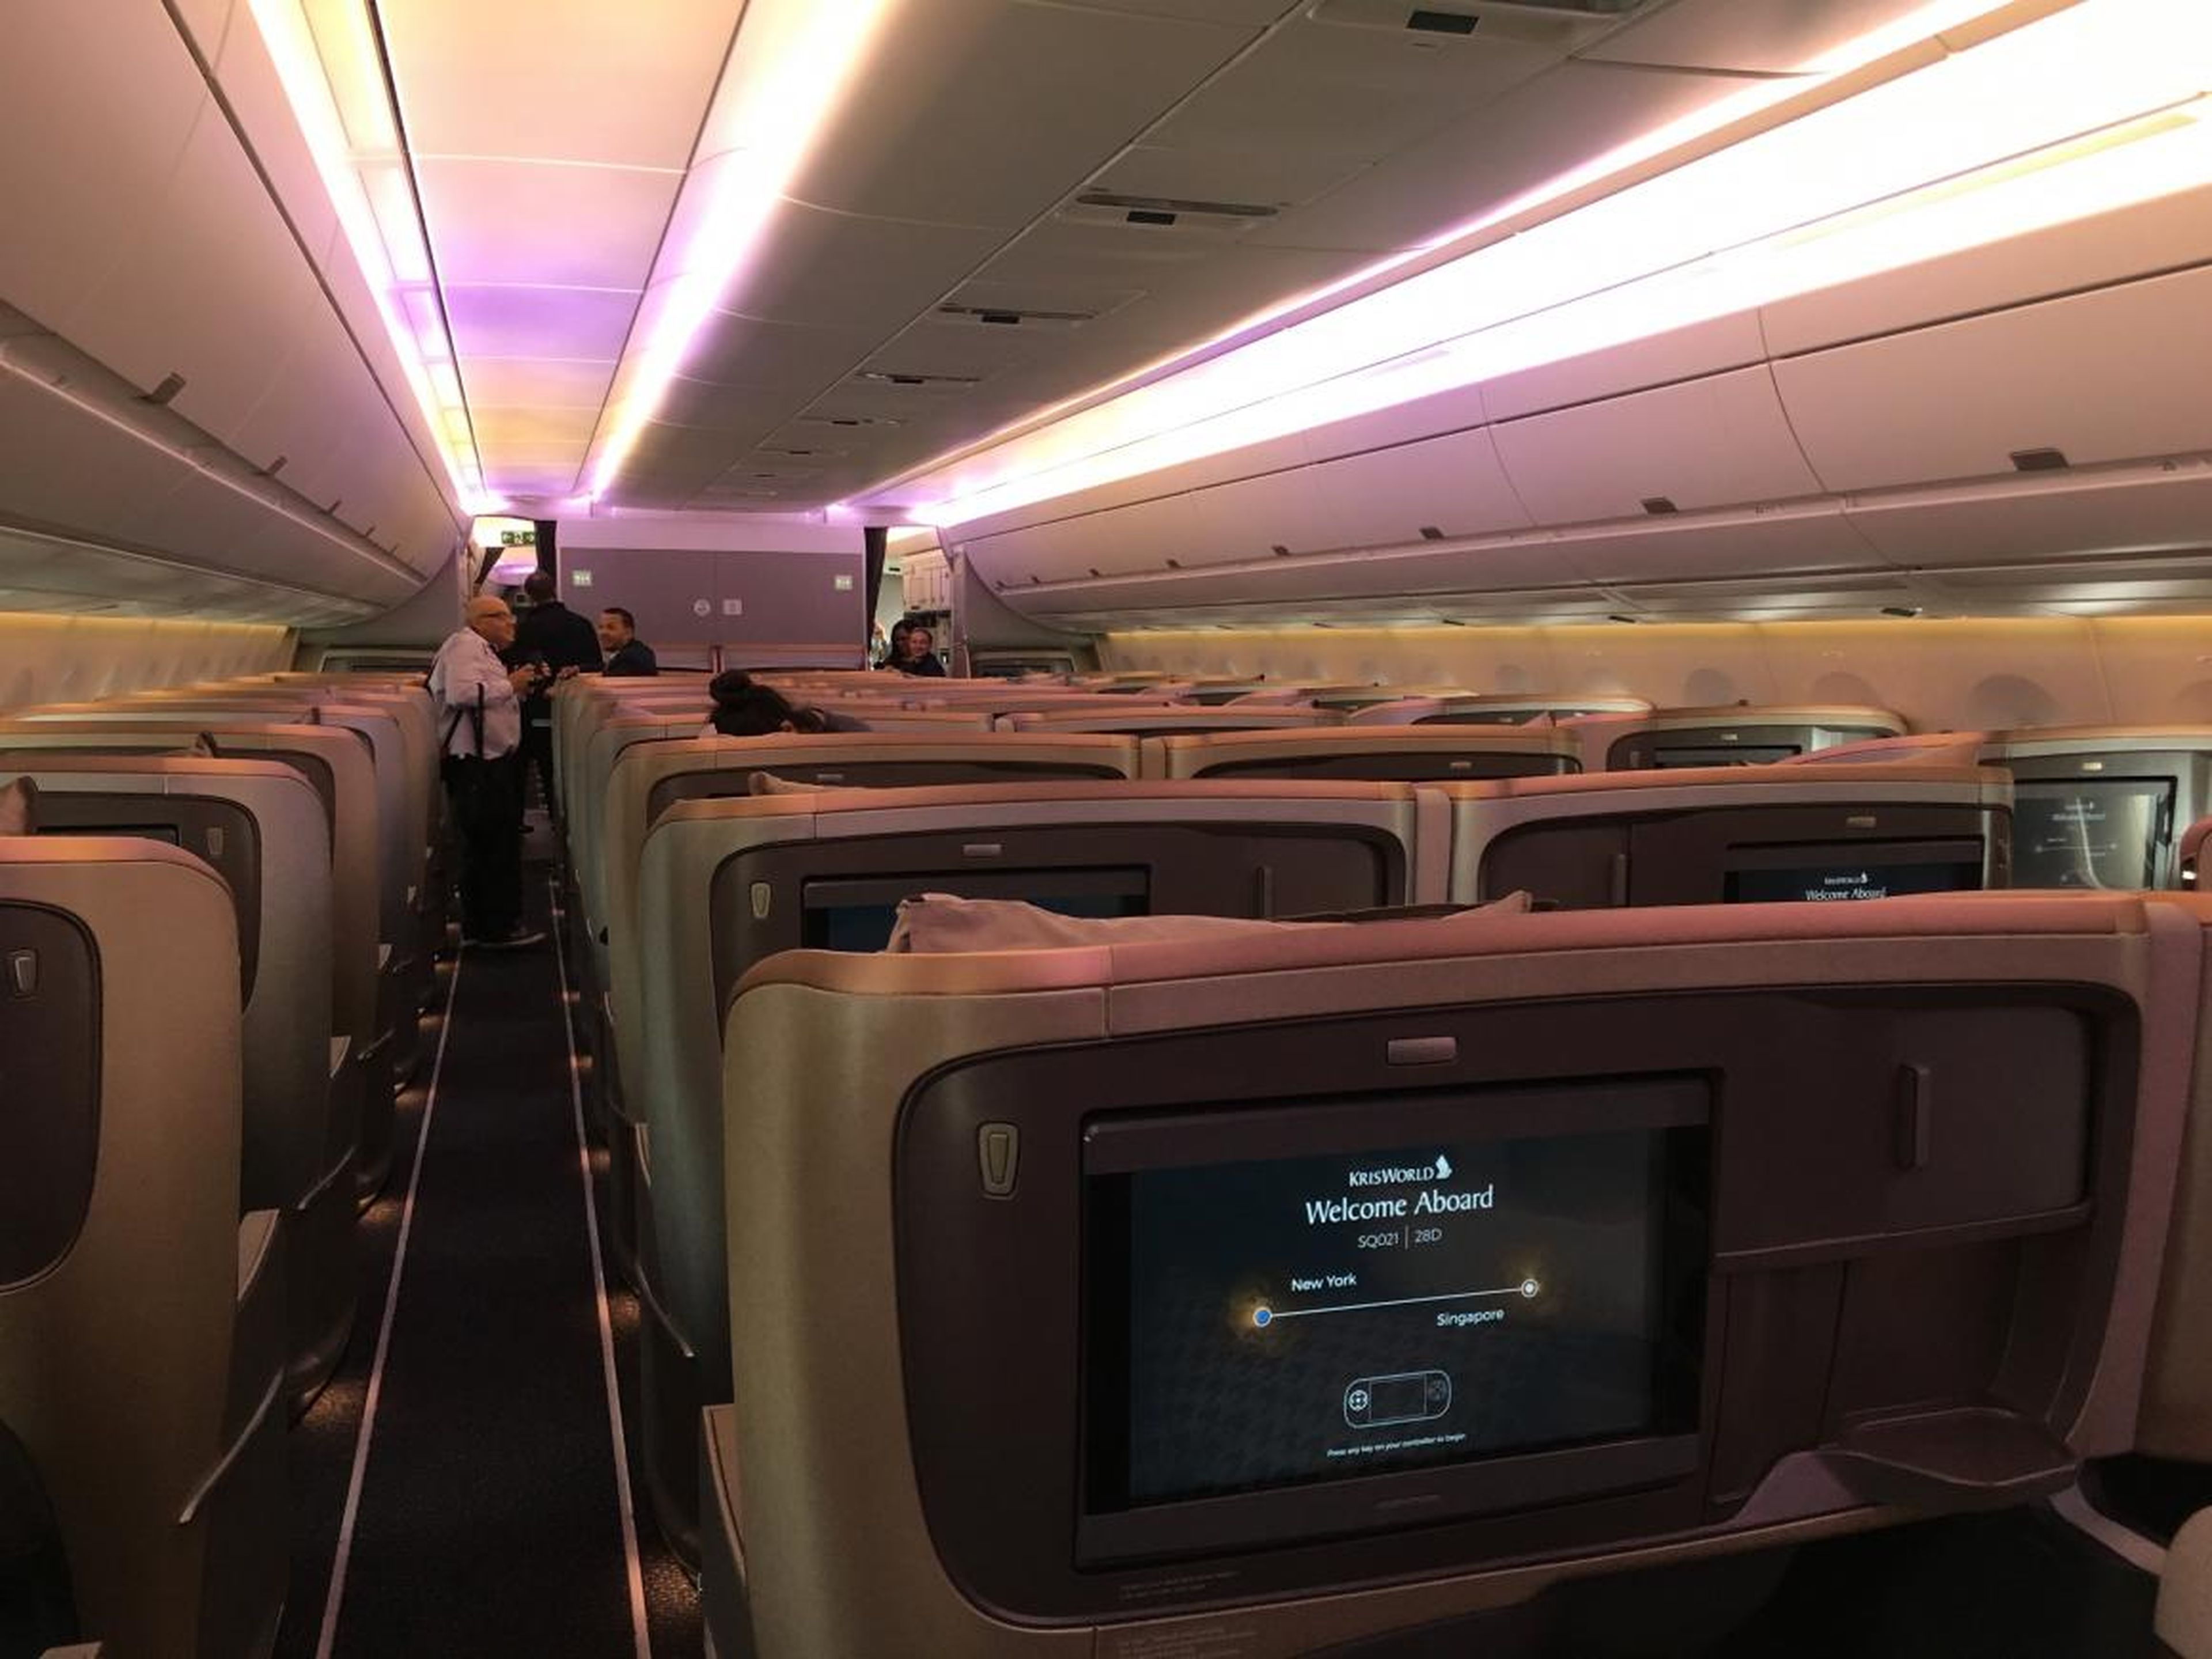 On board, I made my way through the business-class cabin to my seat. Our plane had only 161 seats, with 67 in business ...